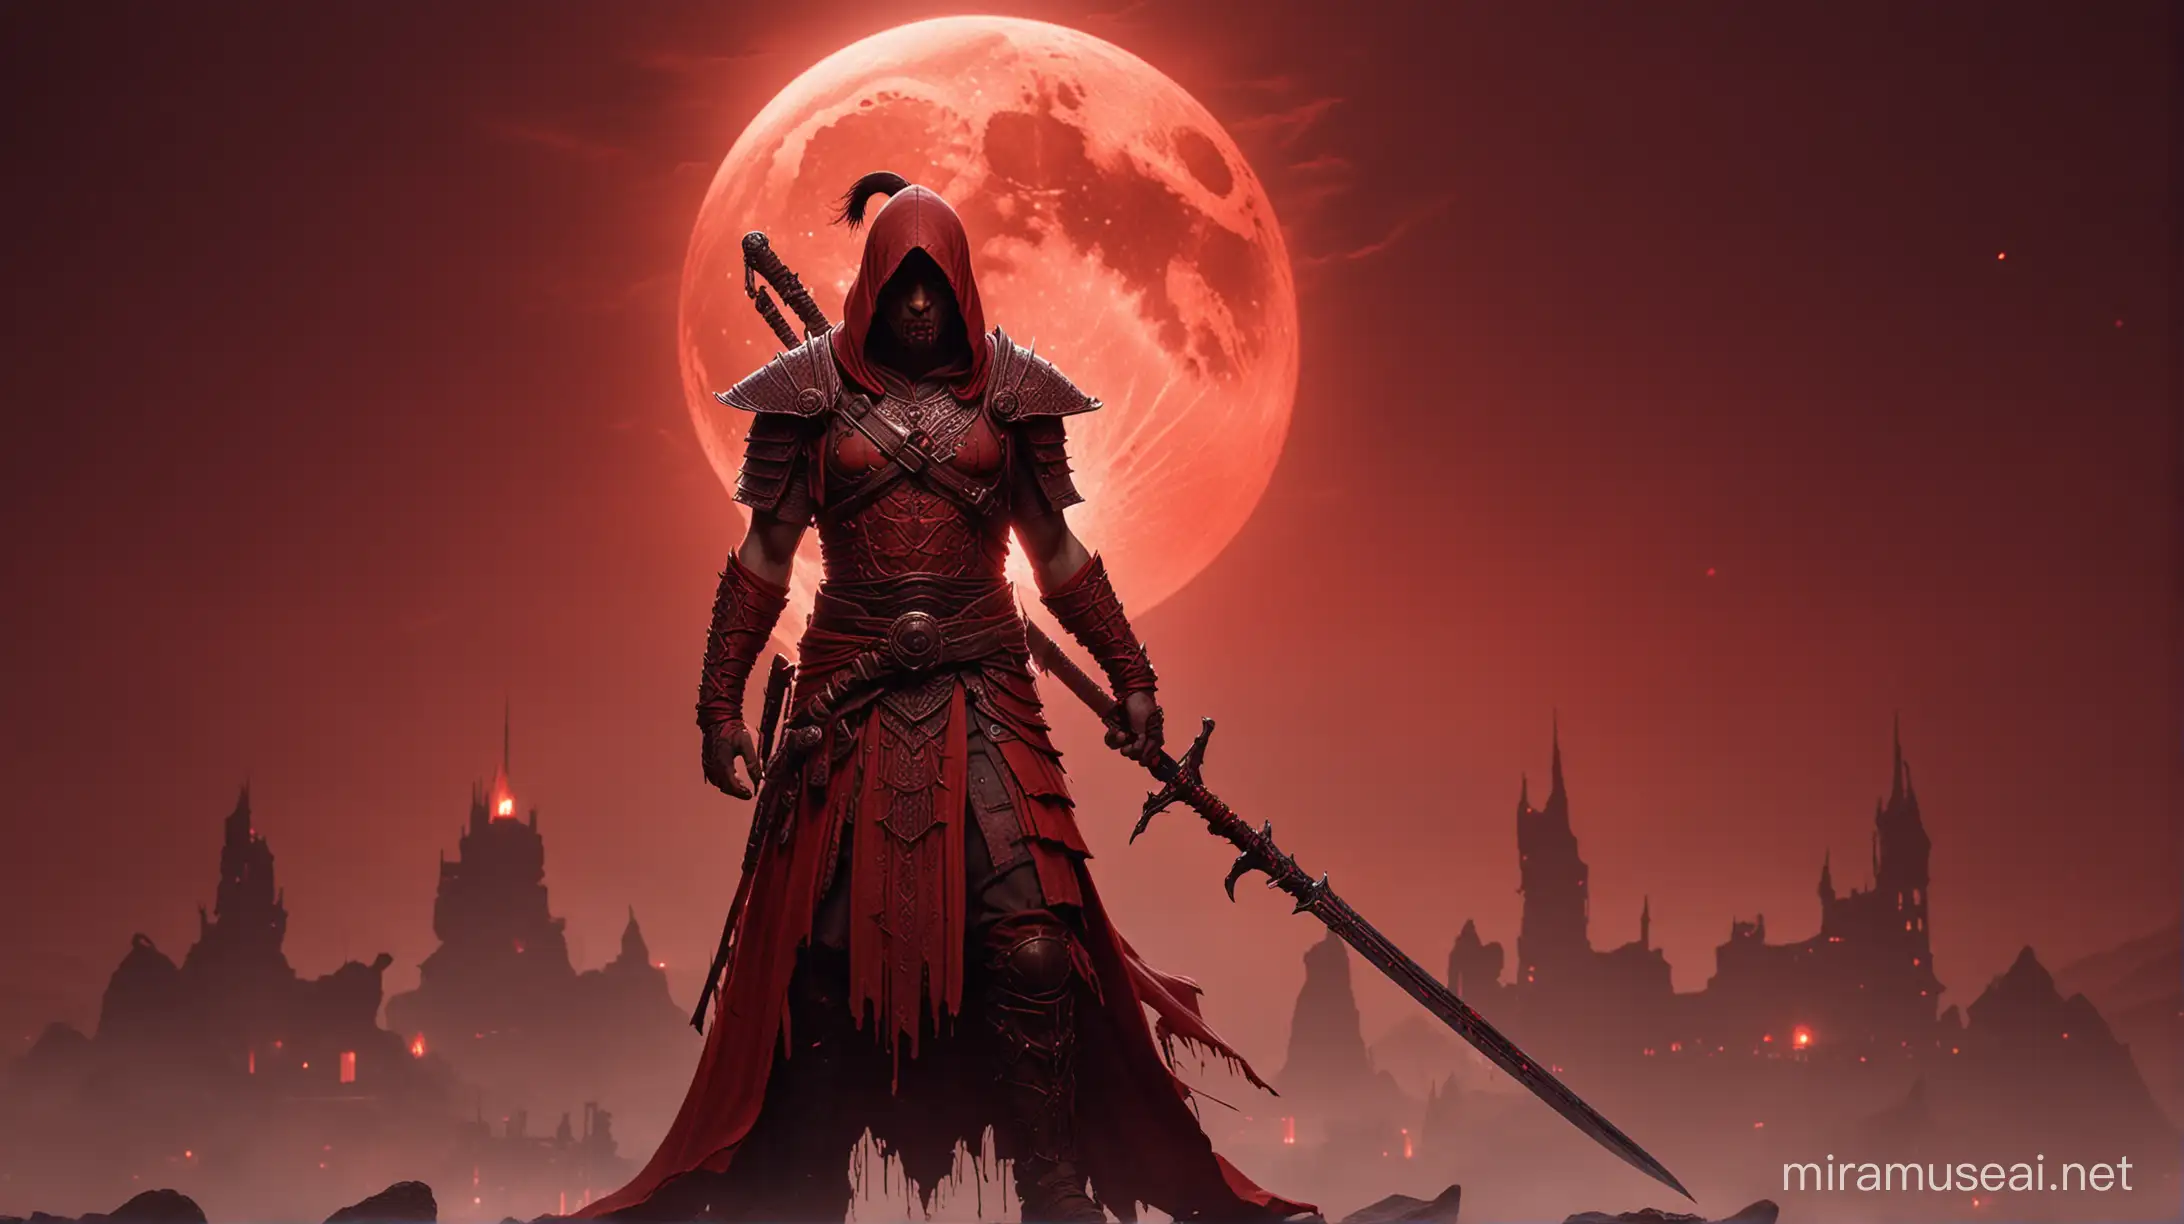 Blood Moon Warrior Red Armor and Blood Dripping Sword